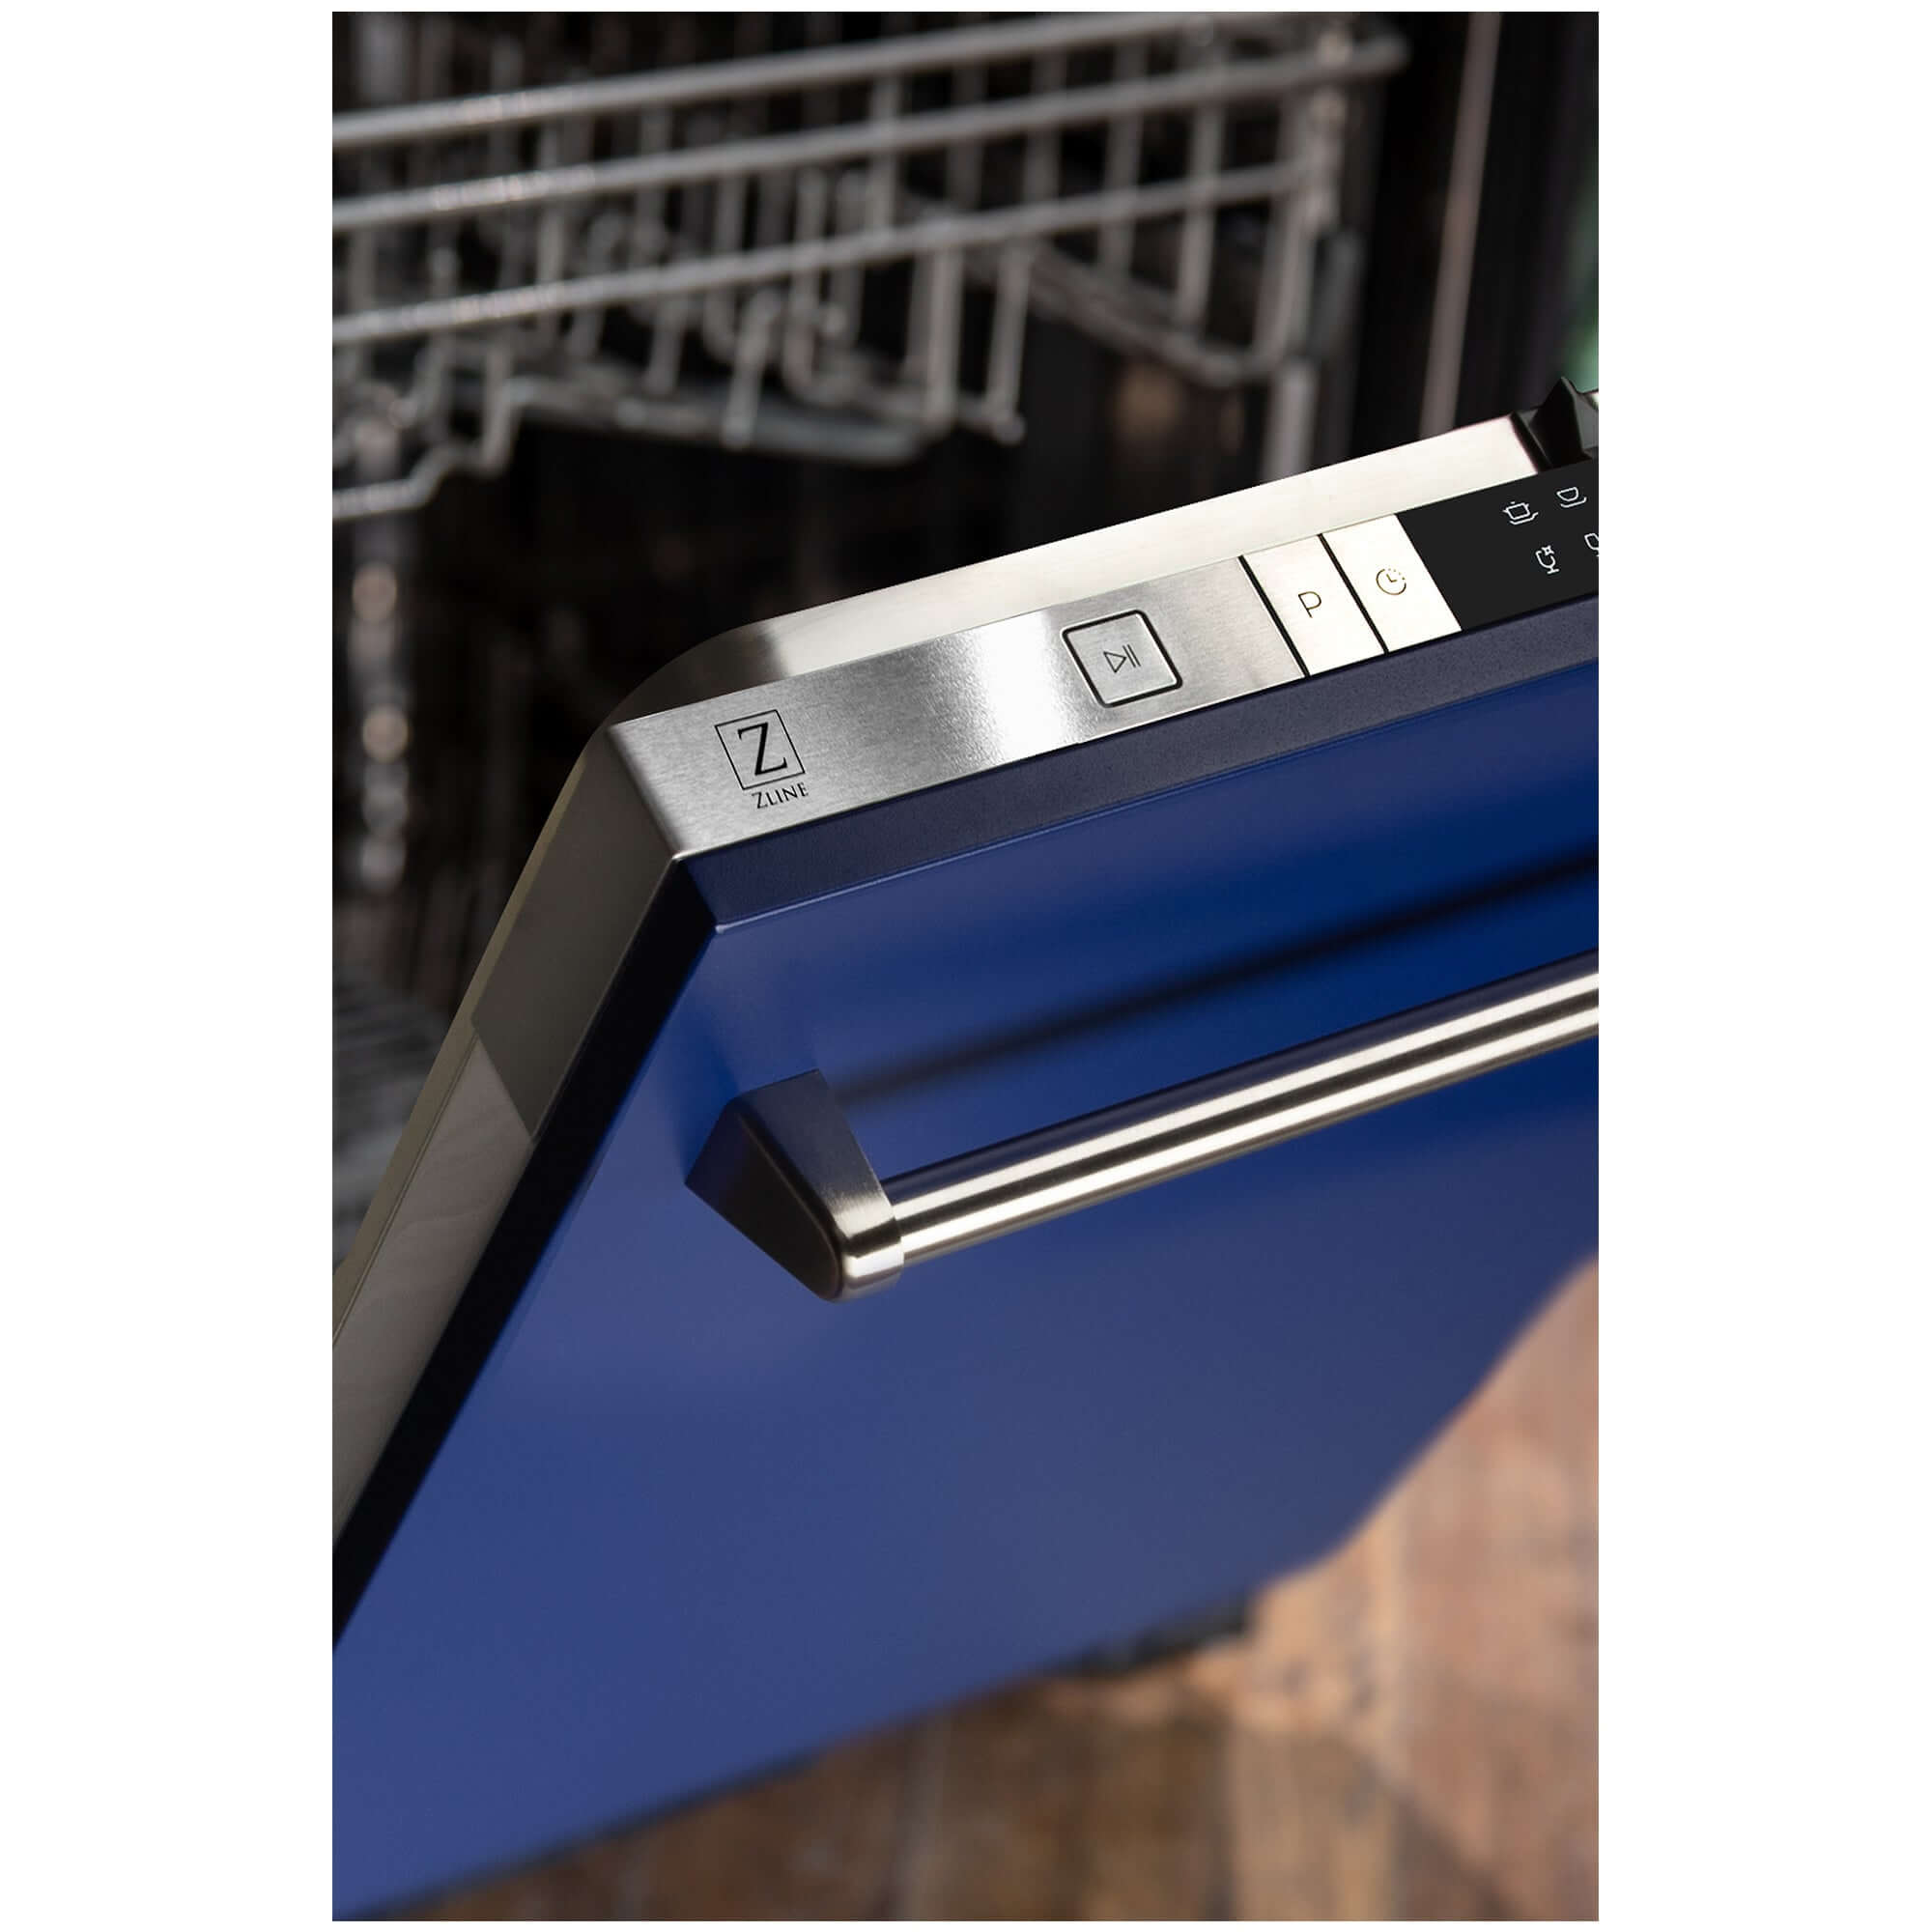 ZLINE 24 in. Blue Matte Top Control Built-In Dishwasher with Stainless Steel Tub and Traditional Style Handle, 52dBa (DW-BM-24) built-in to cabinets in a luxury kitchen.